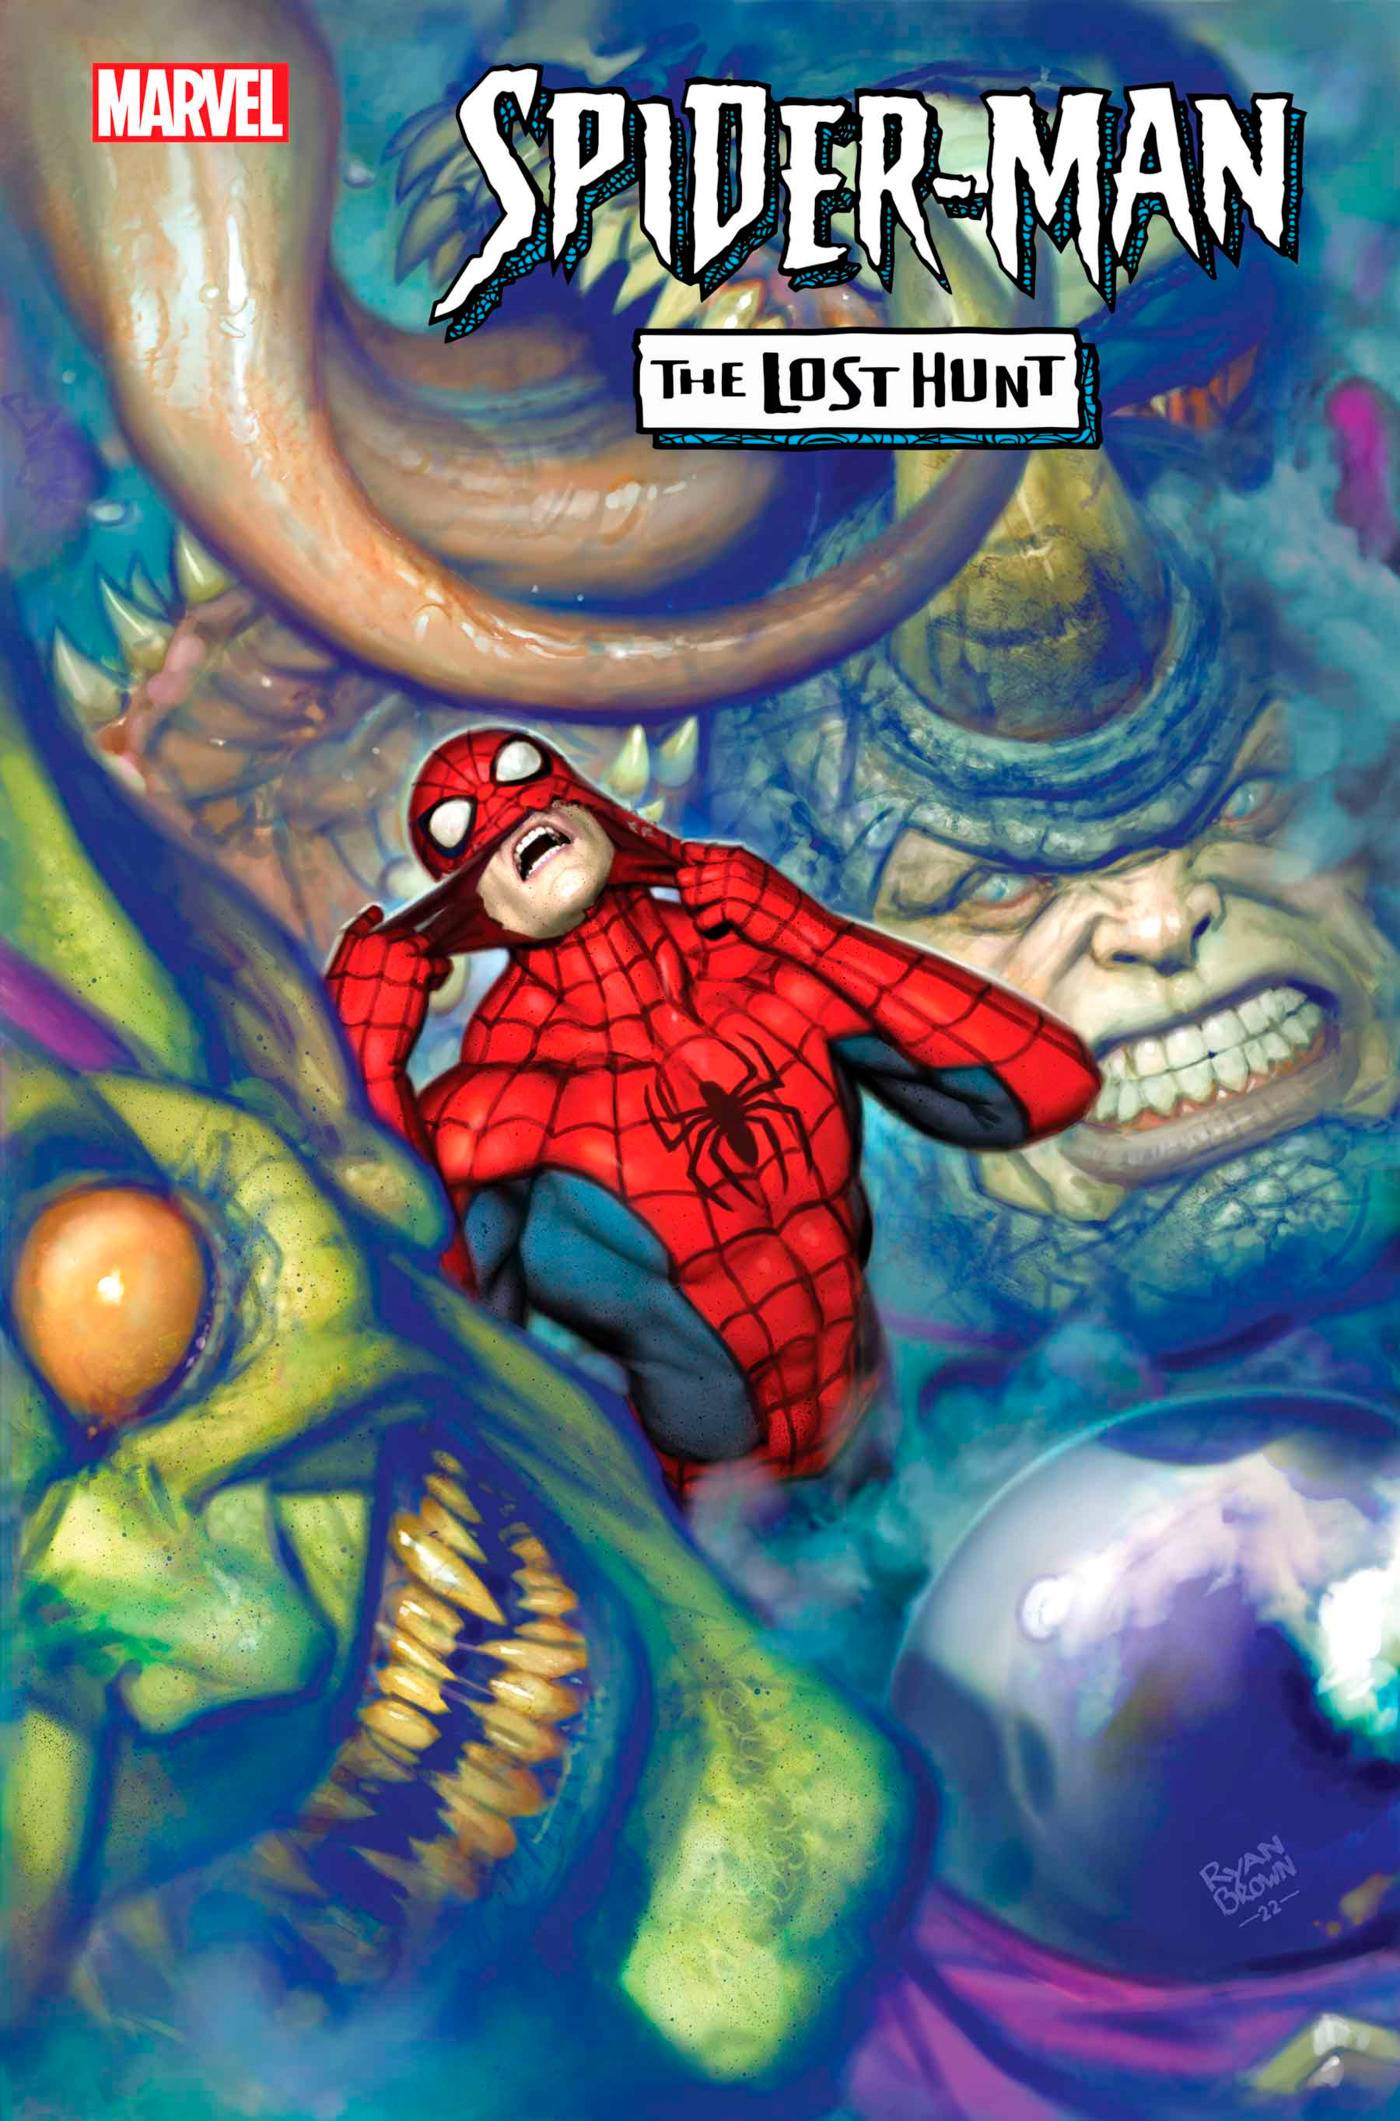 SPIDER-MAN LOST HUNT #3 (OF 5) - King Gaming 